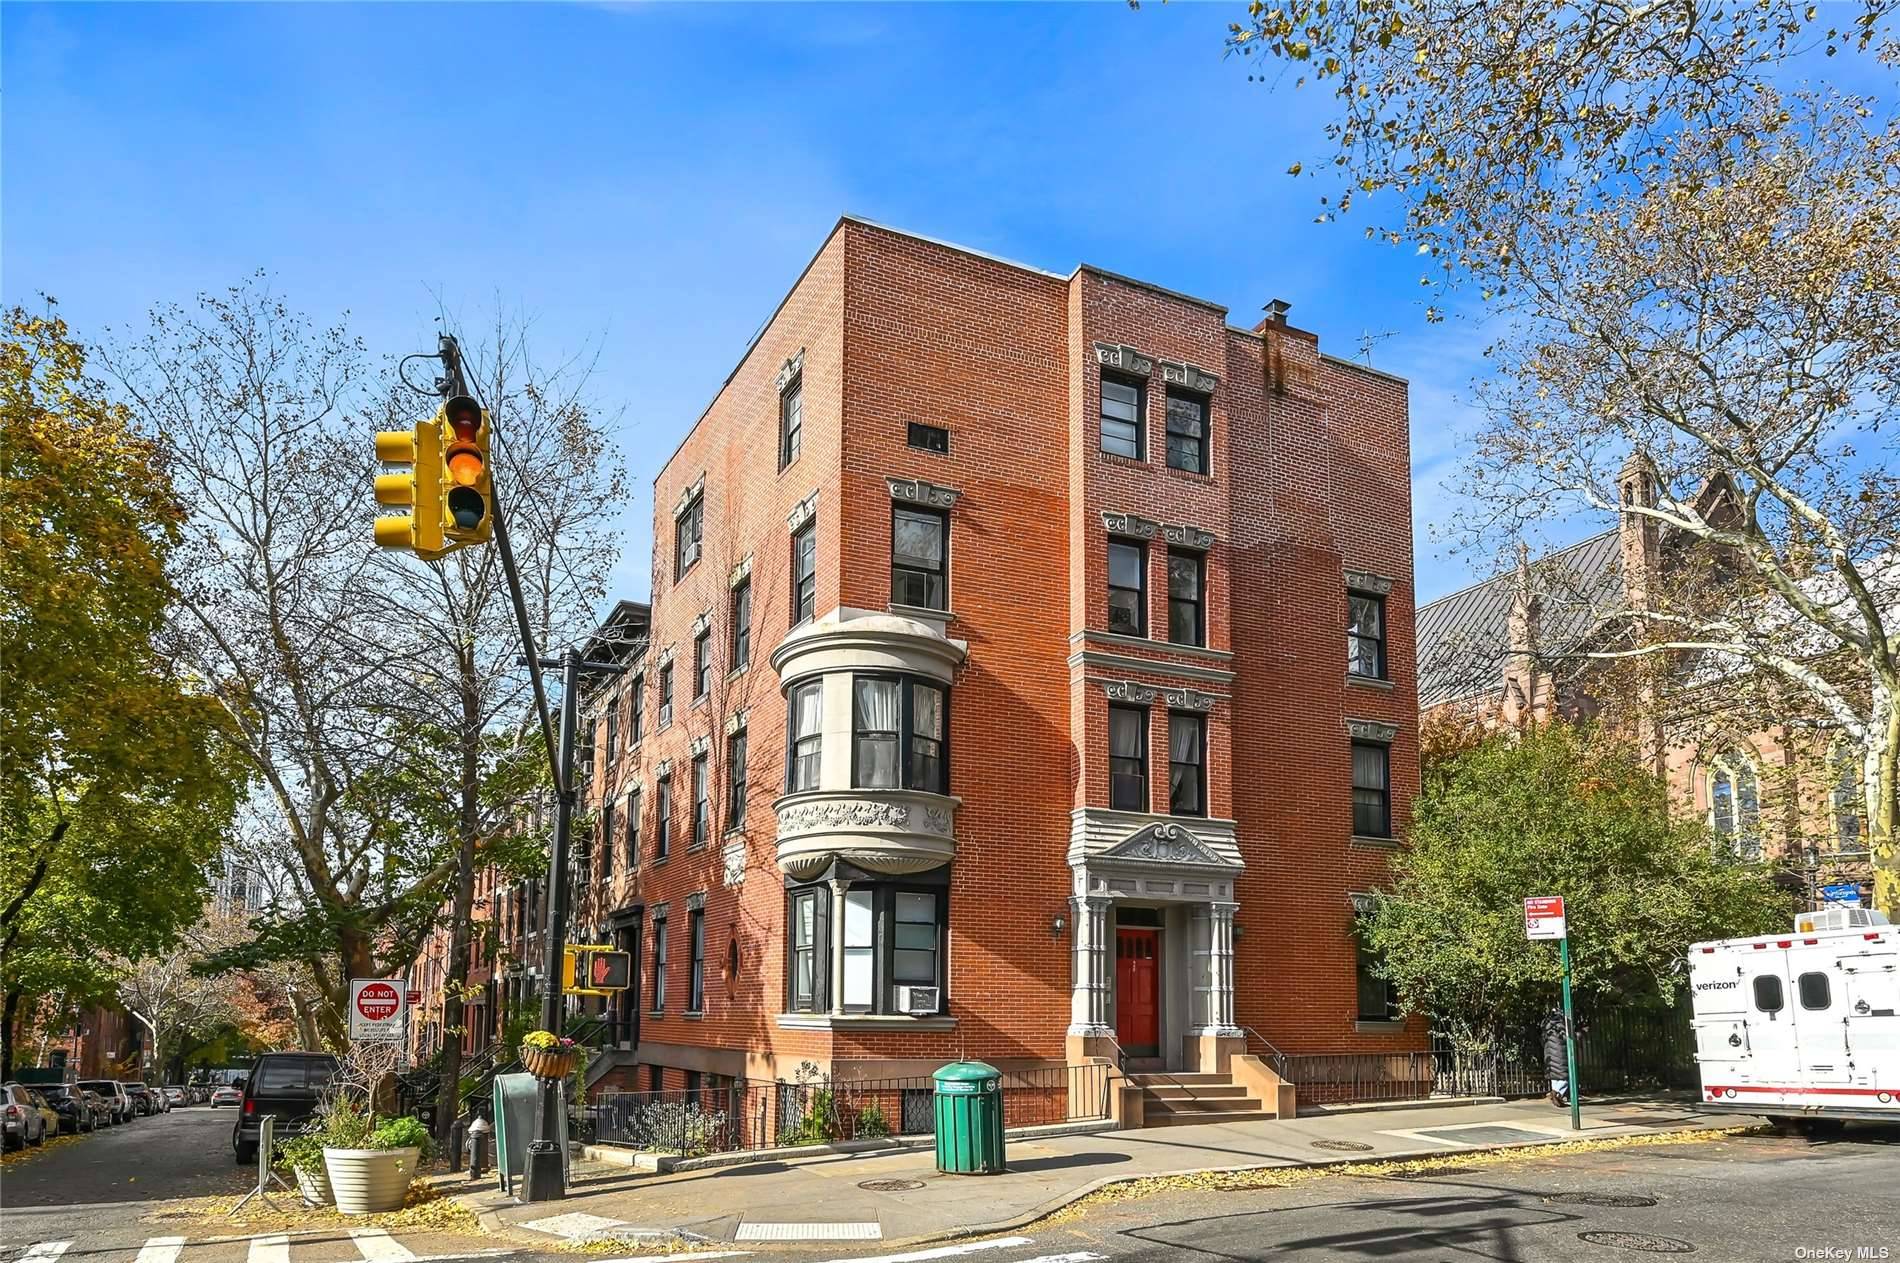 Standing on one of the most picturesque streets of Brooklyn Heights is 260 Hicks Avenue.